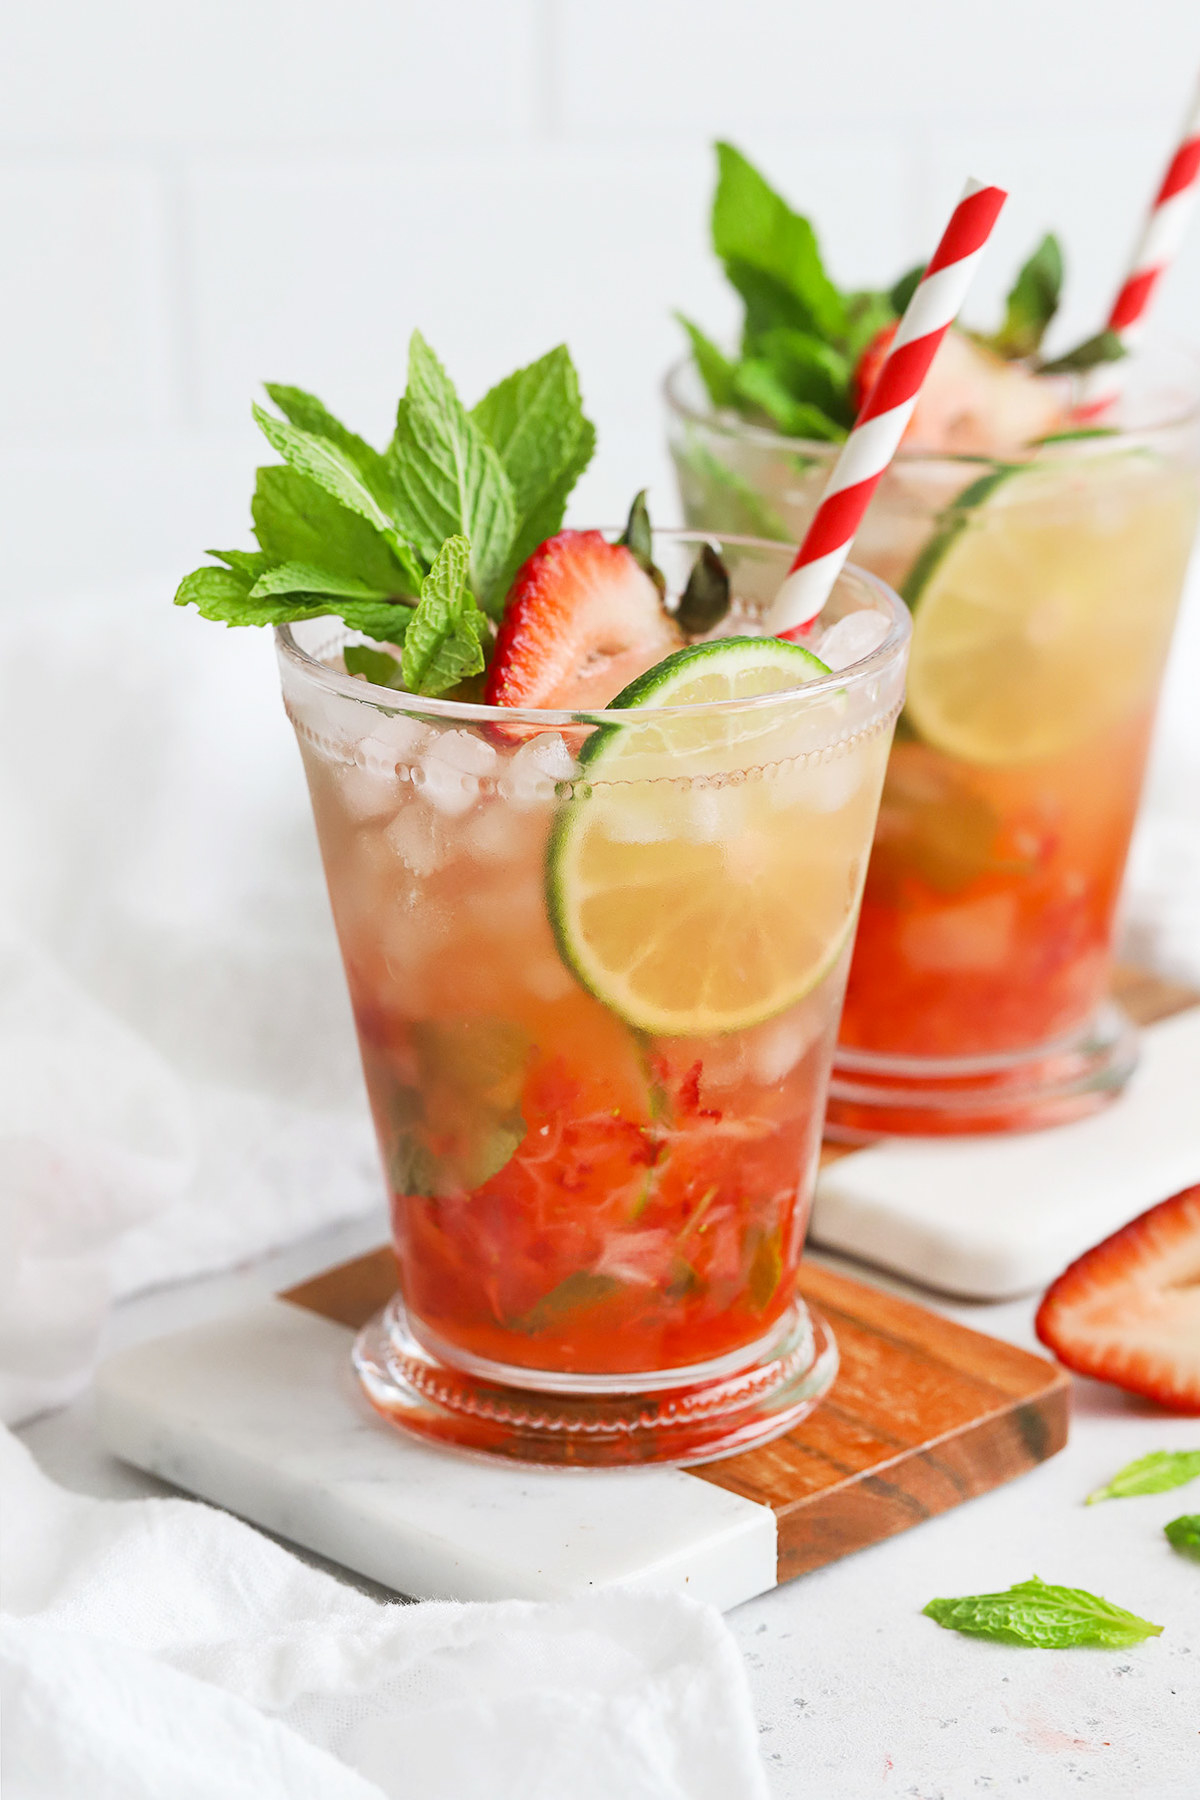 A full glass of crushed pebbly ice, thin lime slices, sliced strawberries, and strawberry mint julep